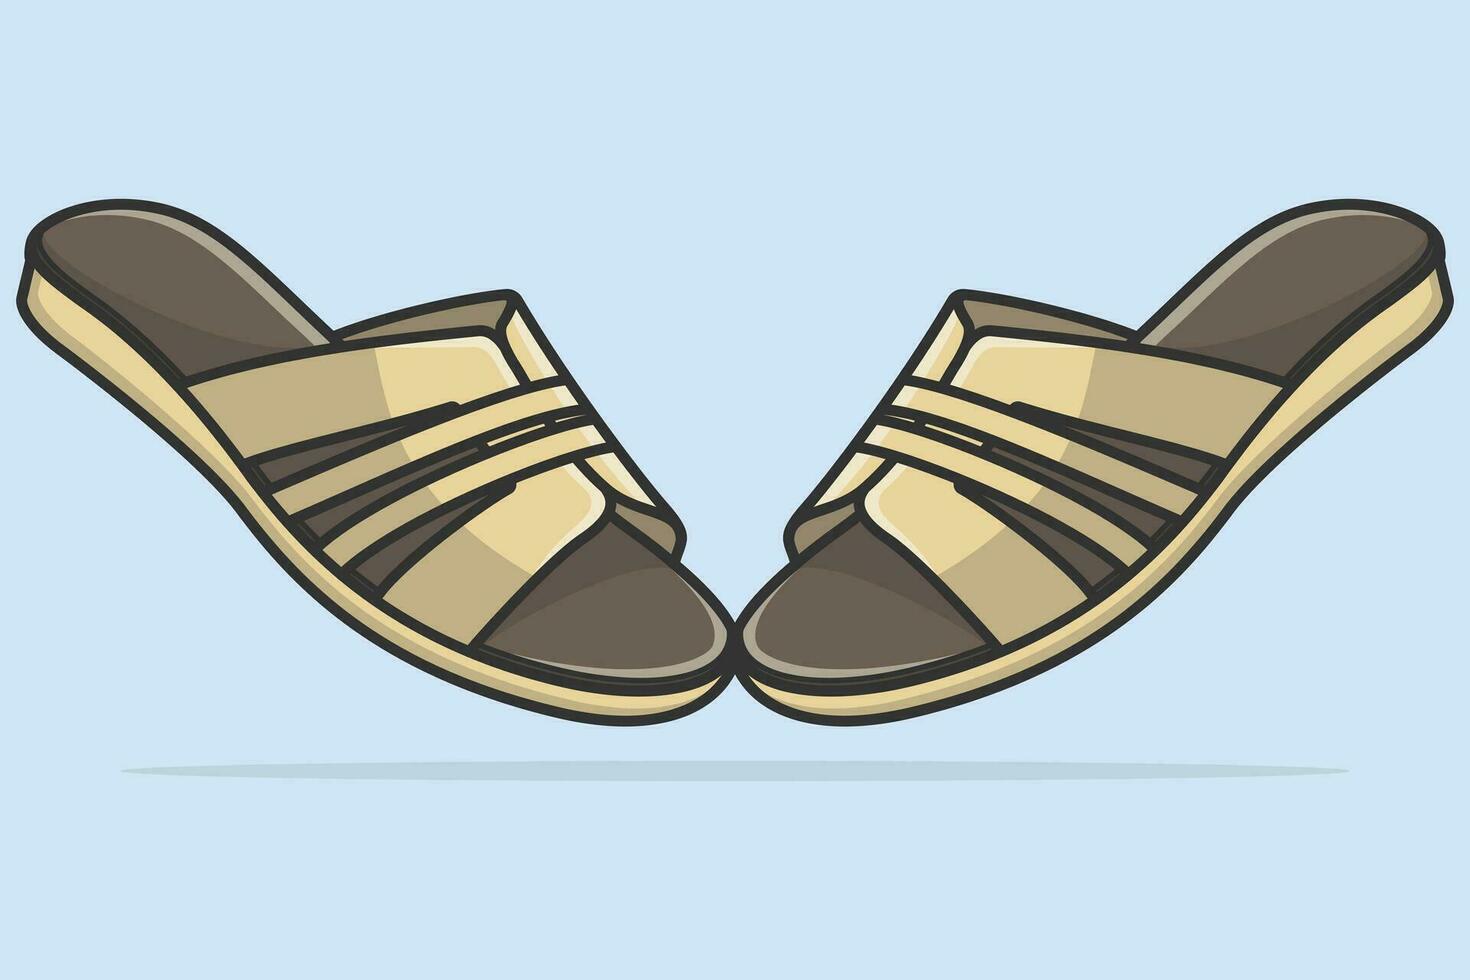 Pair Of Women Flat Slipper Shoes vector illustration. Beauty fashion objects icon concept. Fashionable woman unique slipper pair vector design with shadow.